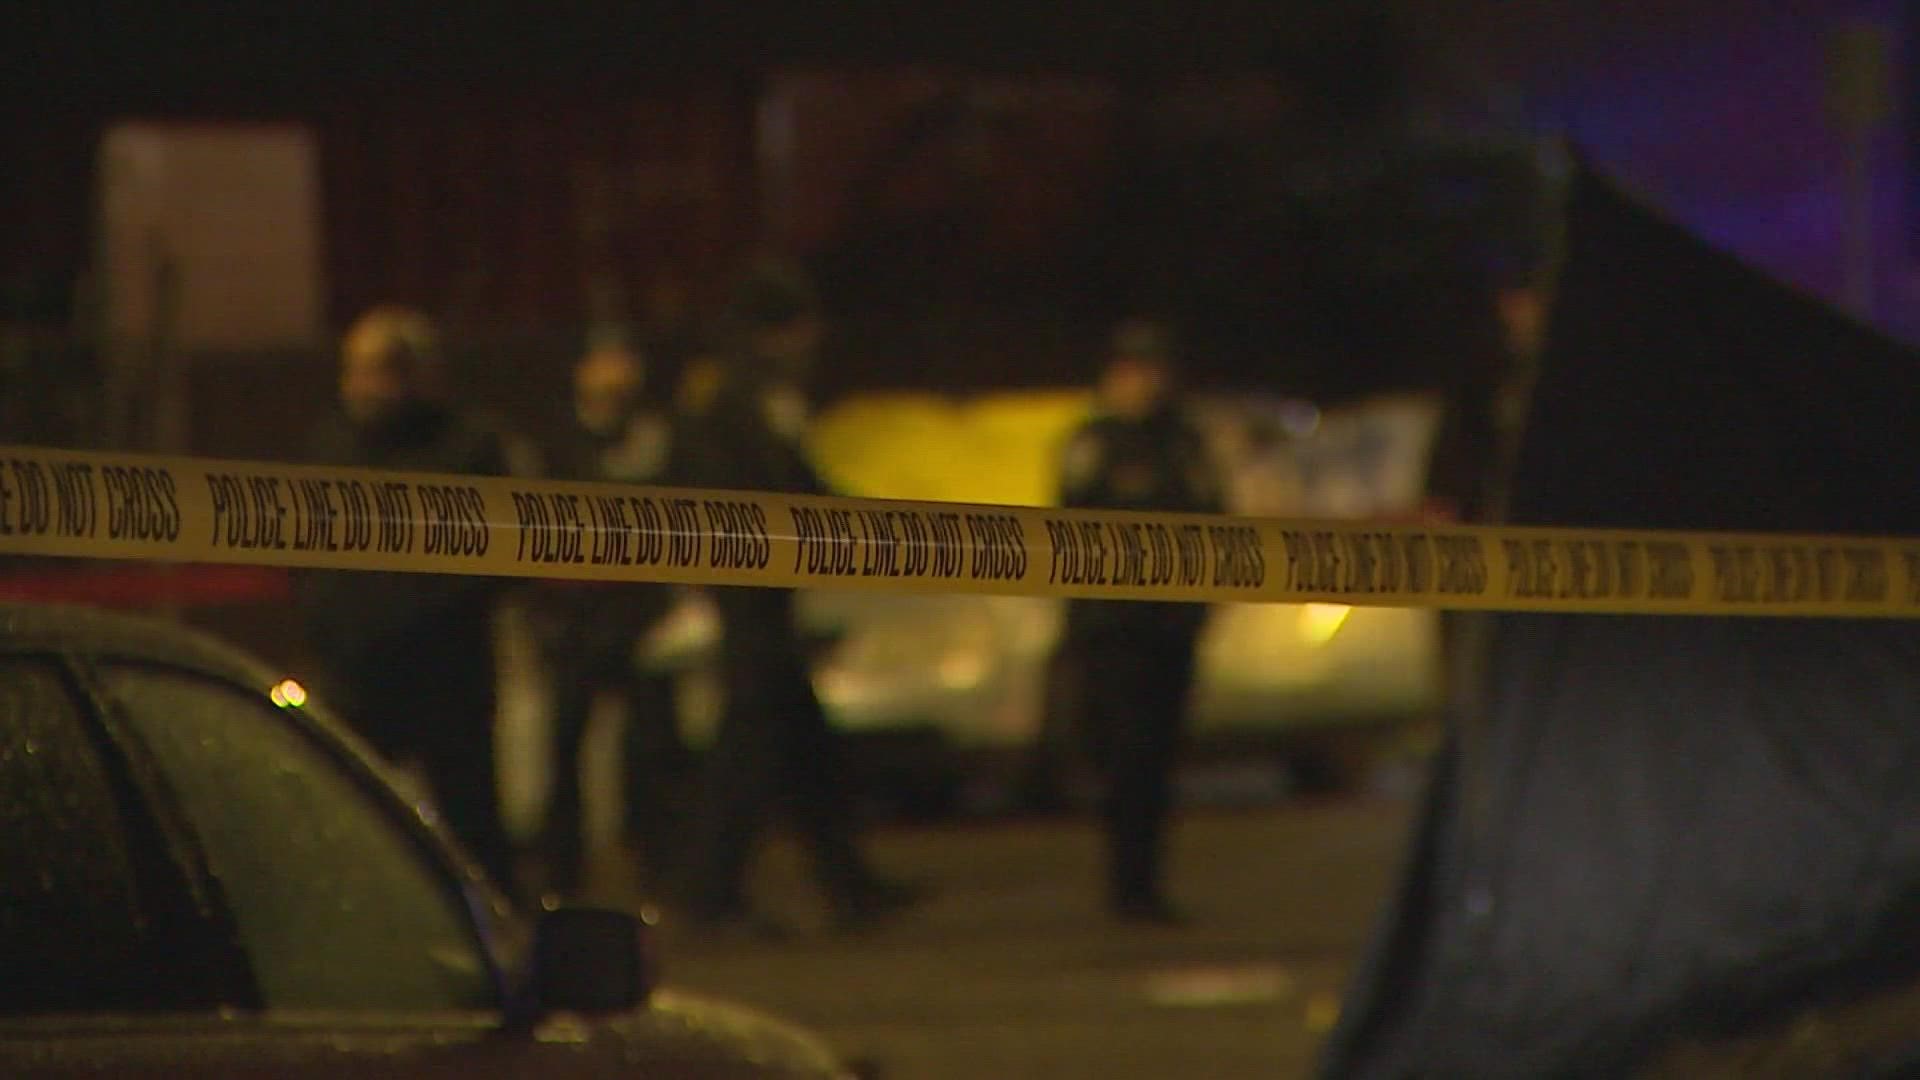 The victims were found shot to death in a car in the Georgetown neighborhood.